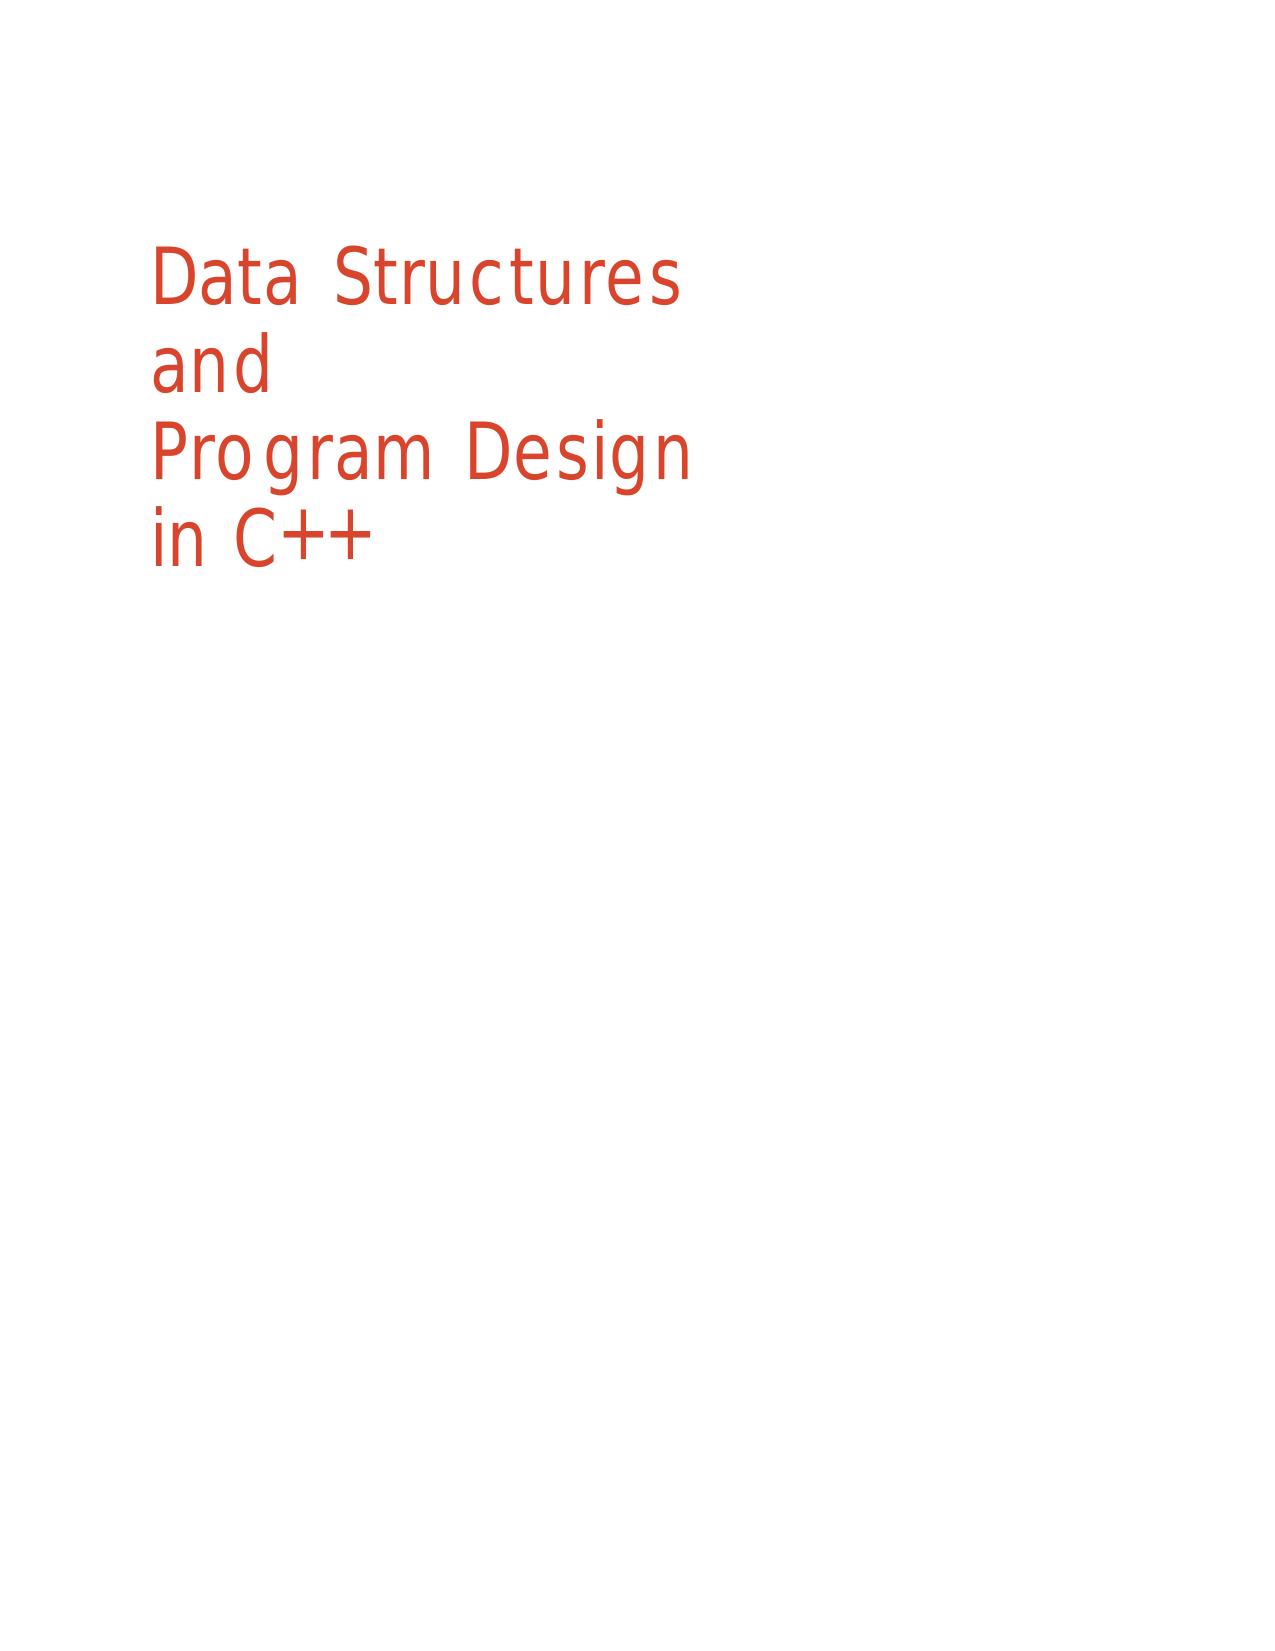 Data structures and Program Design in C++